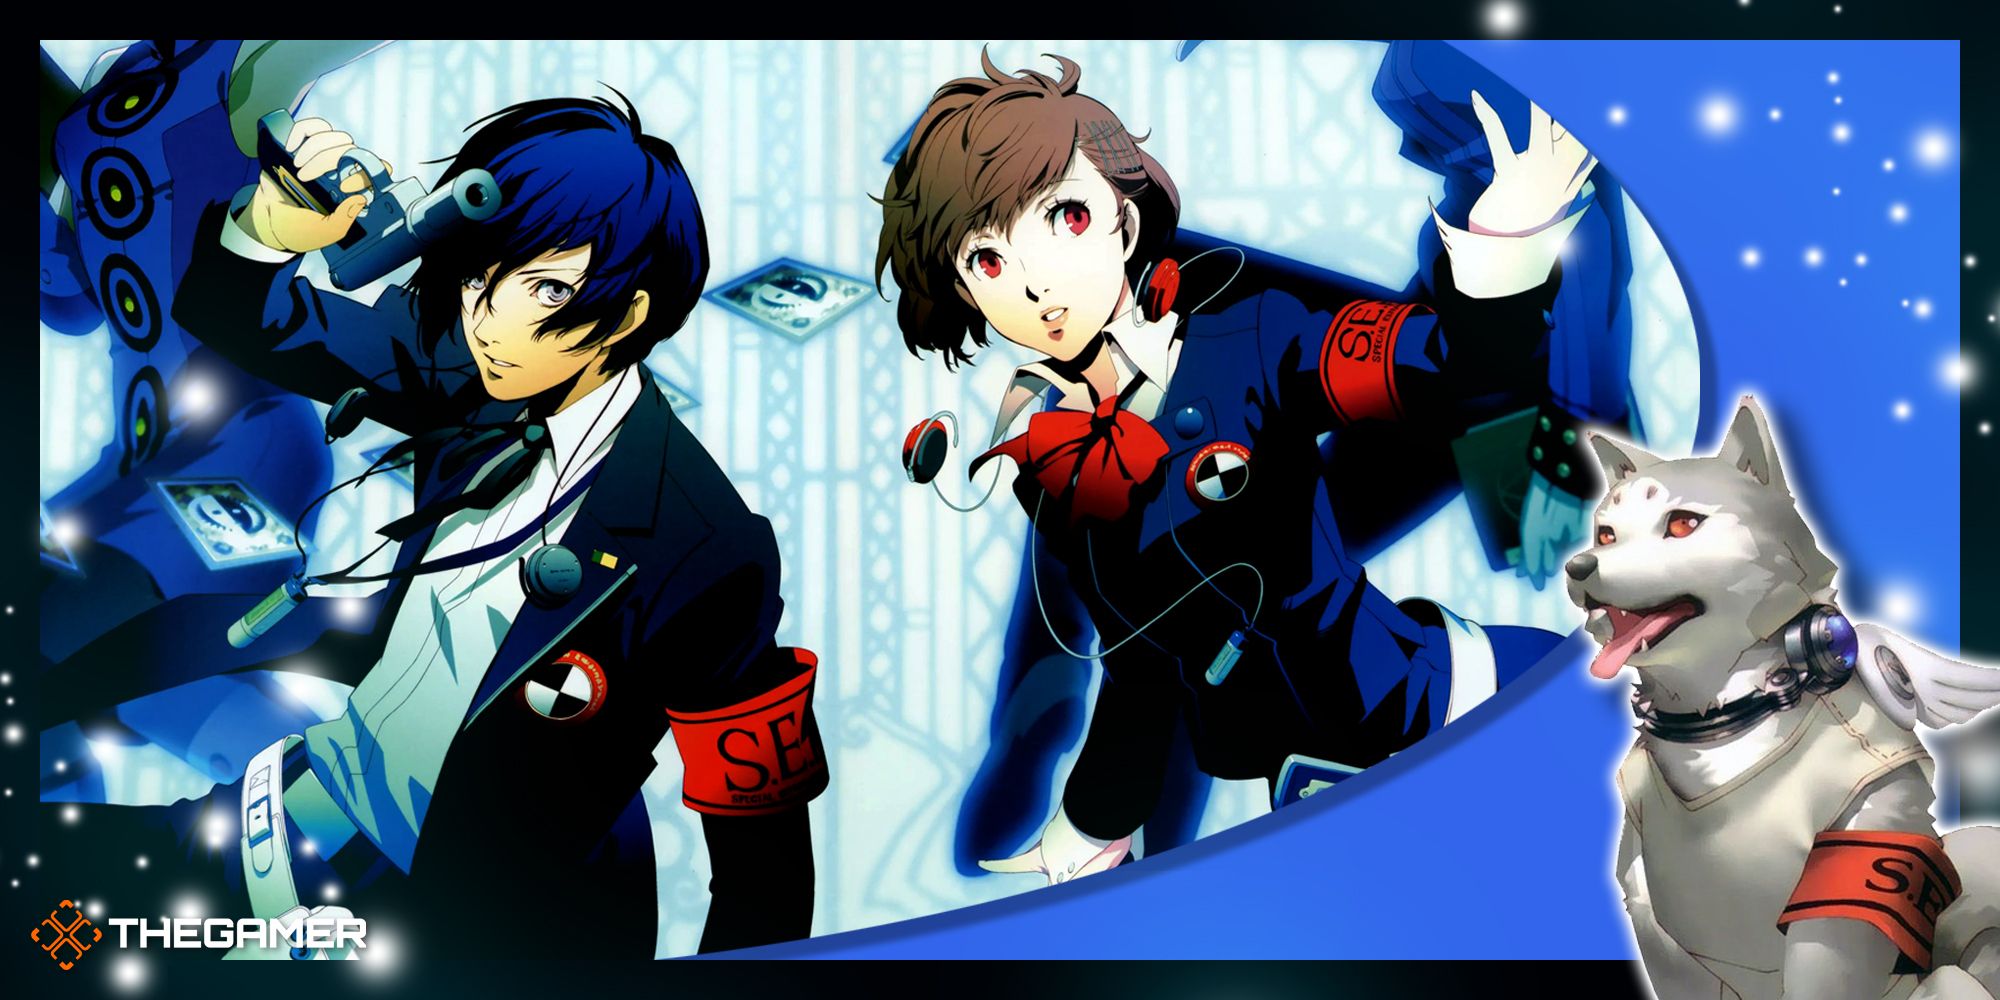 Should You Pick The Male Or Female Protagonist In Persona 3 Portable?